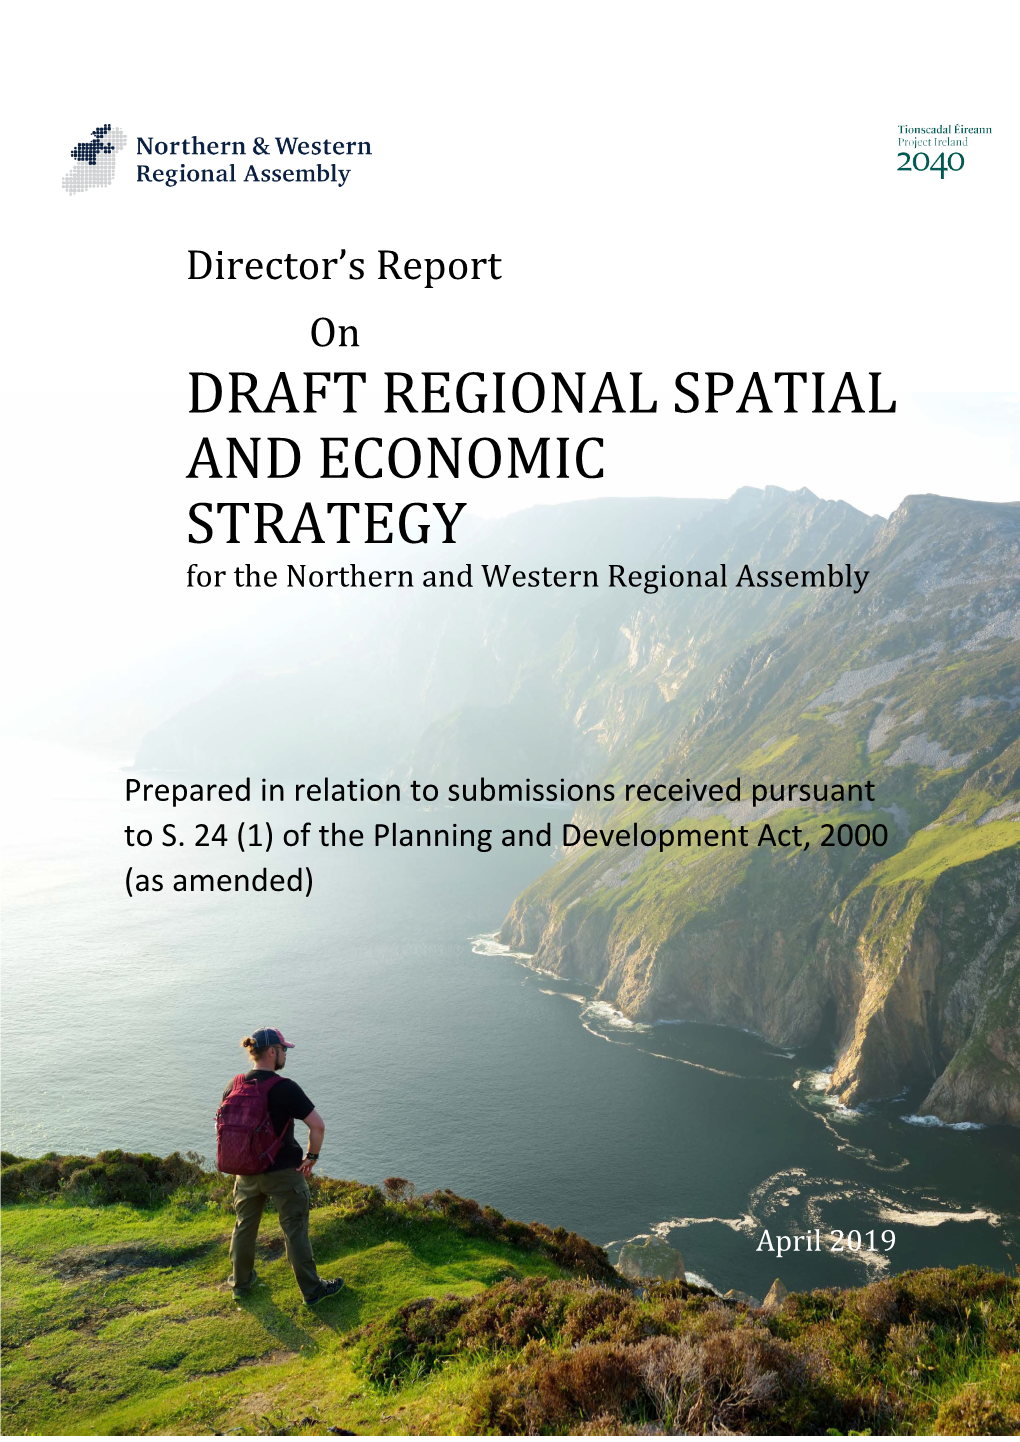 DRAFT REGIONAL SPATIAL and ECONOMIC STRATEGY for the Northern and Western Regional Assembly